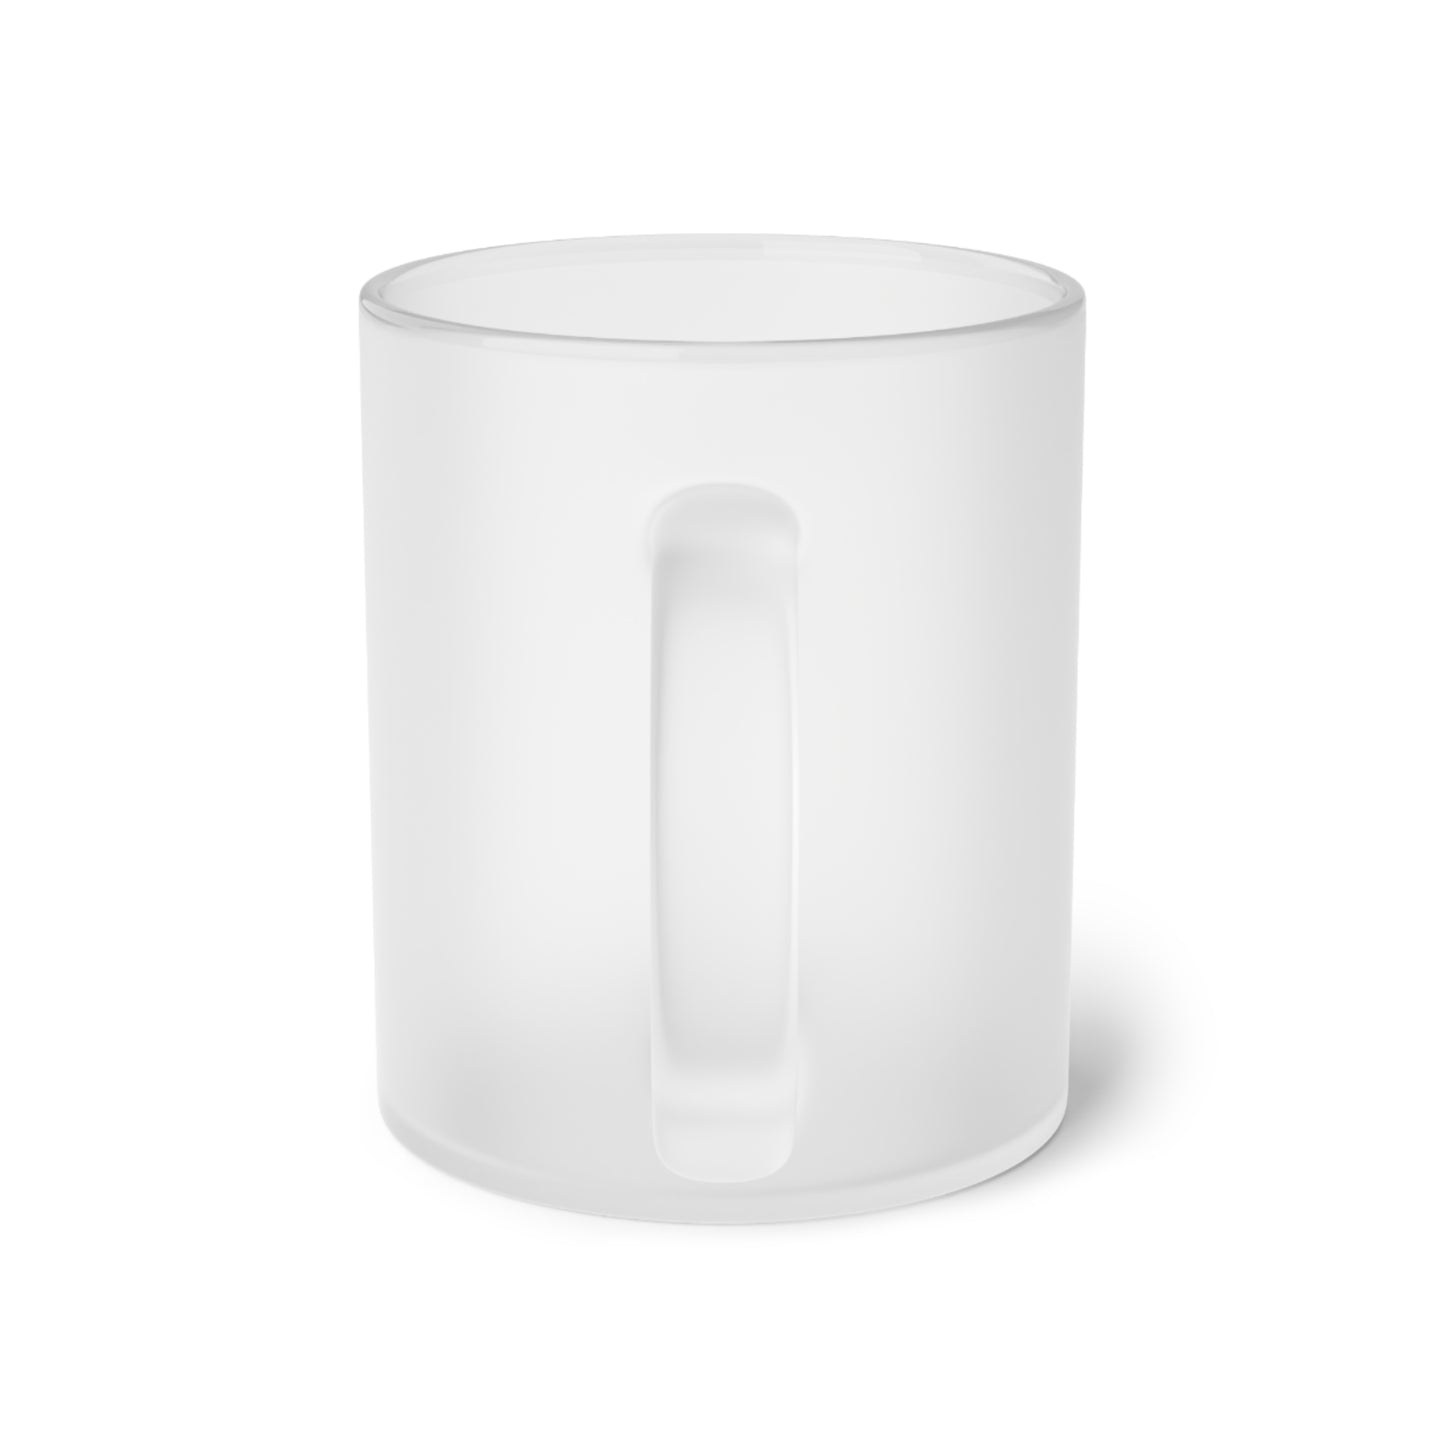 Frosted Glass Mug With Text Title: Life Writer Me